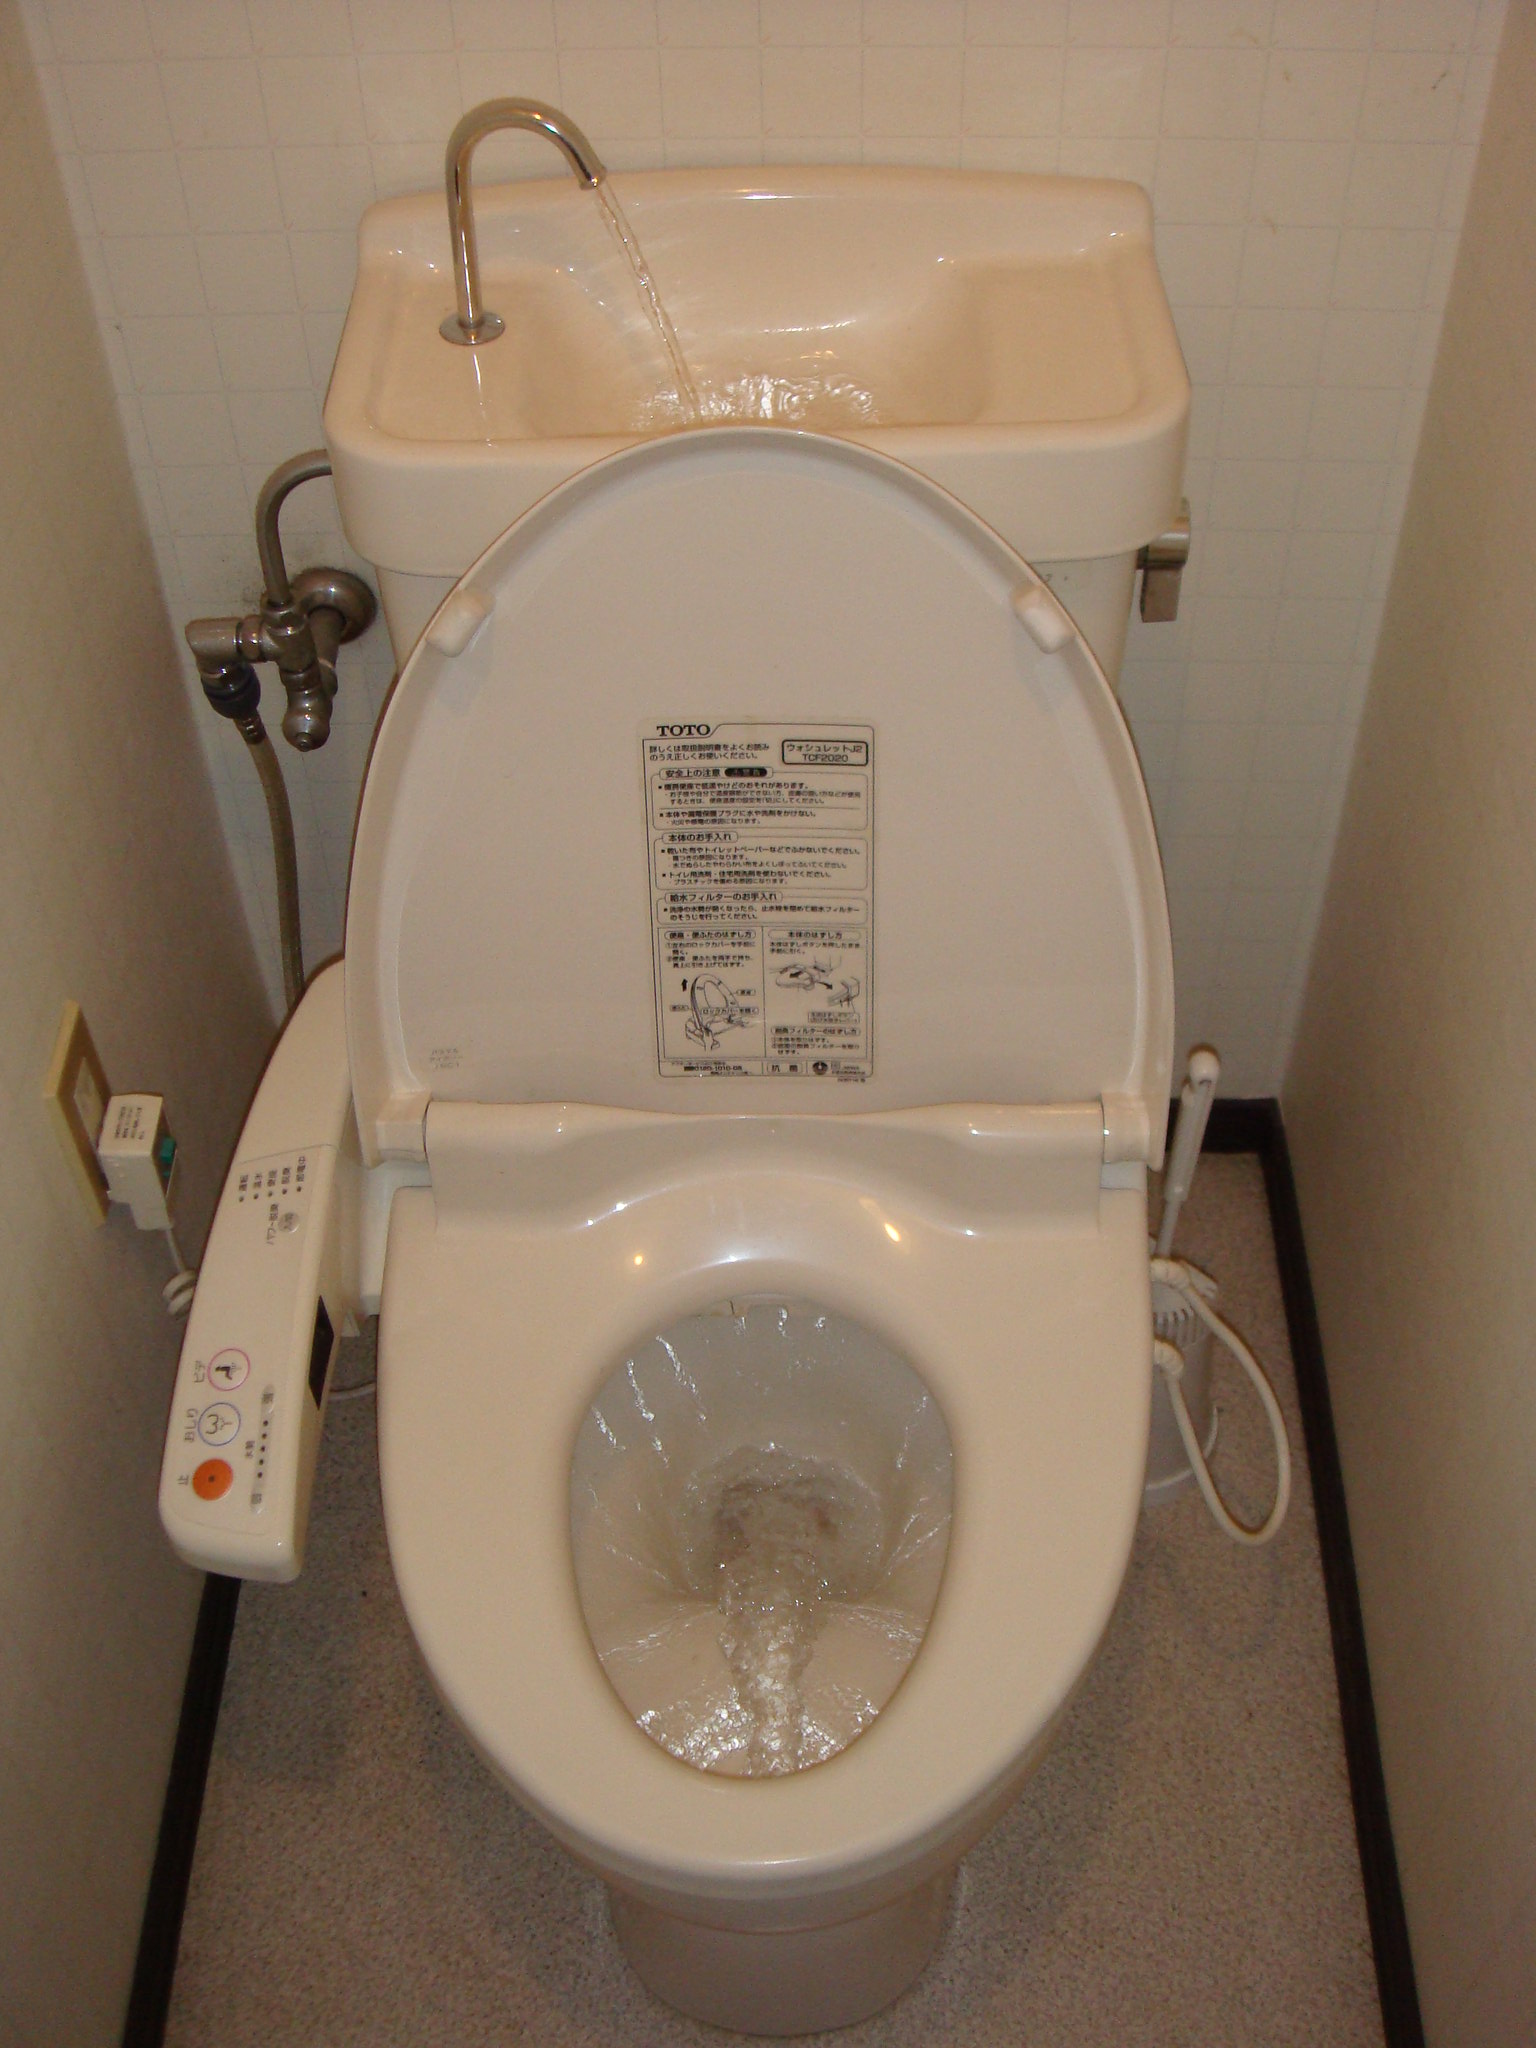 The famous Japanese electric toilet